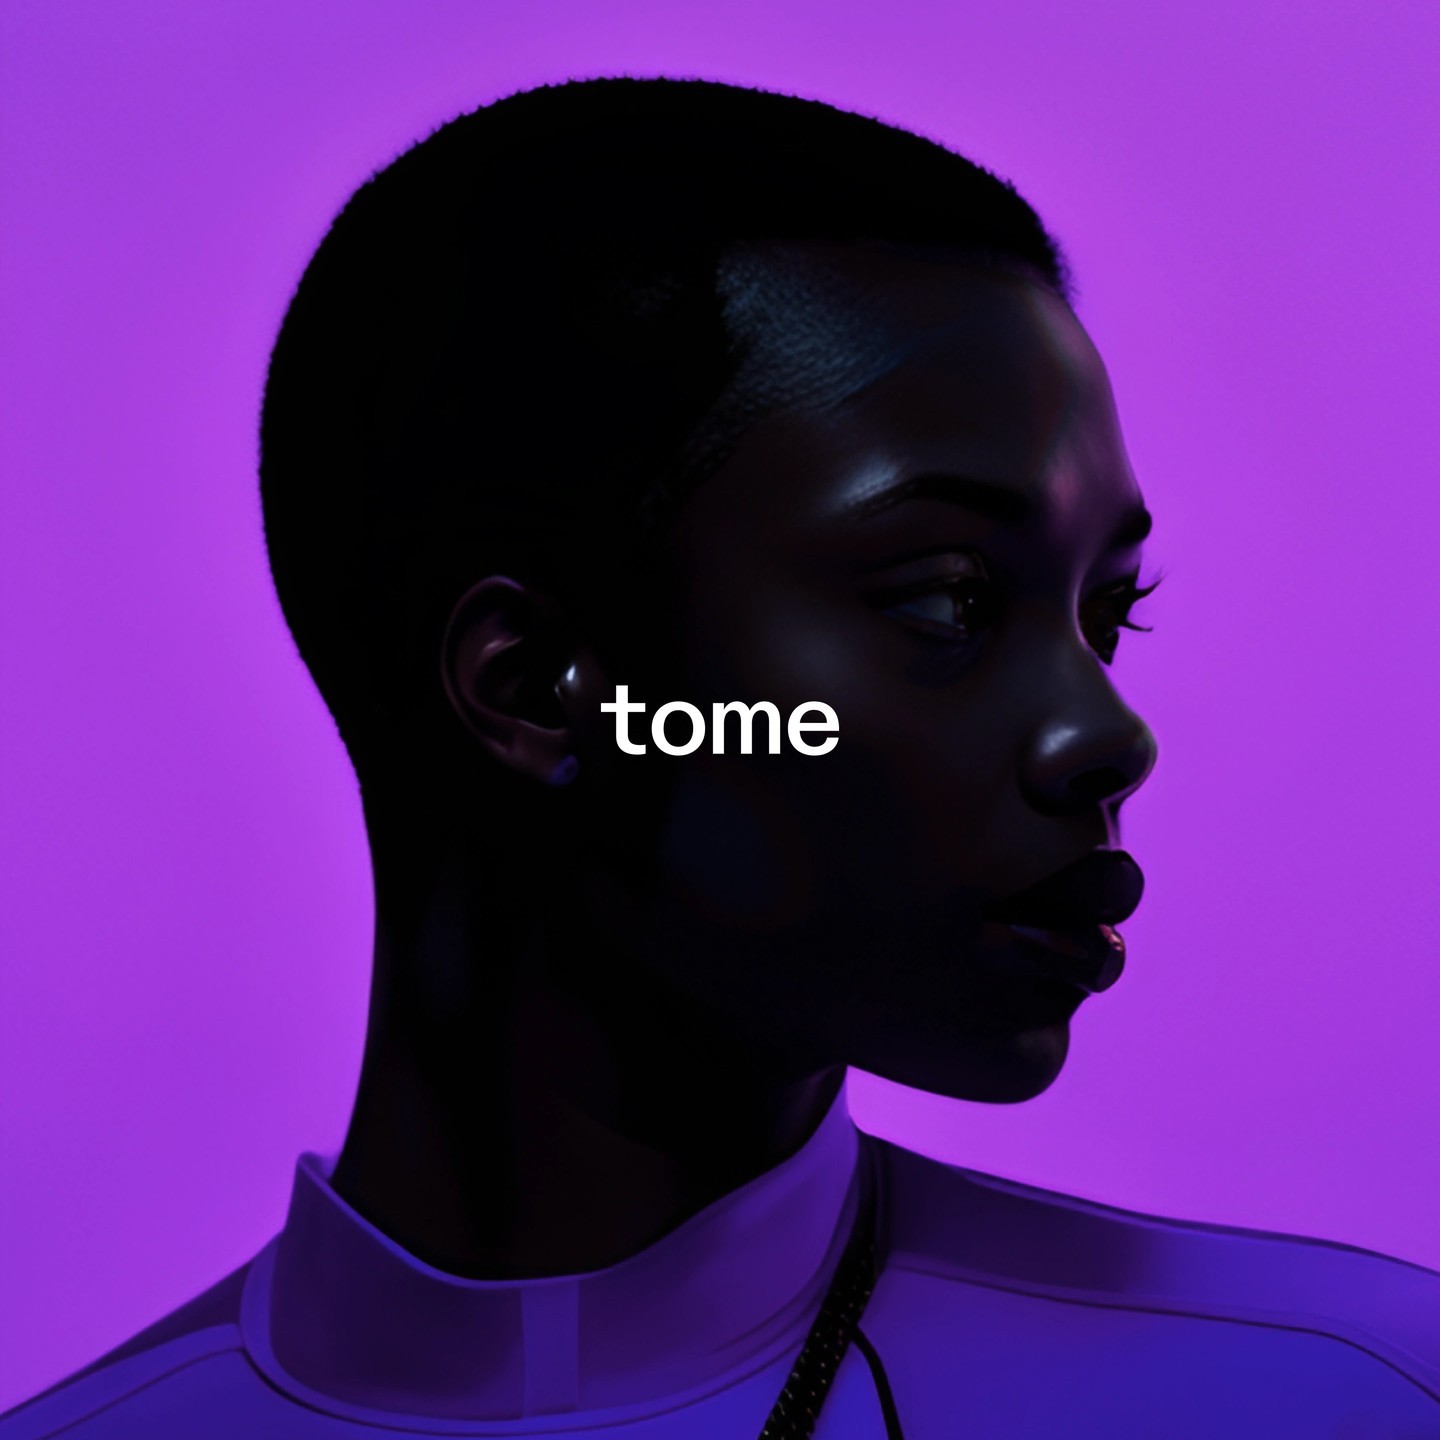 Tome logo set against AI-generated woman against purple background